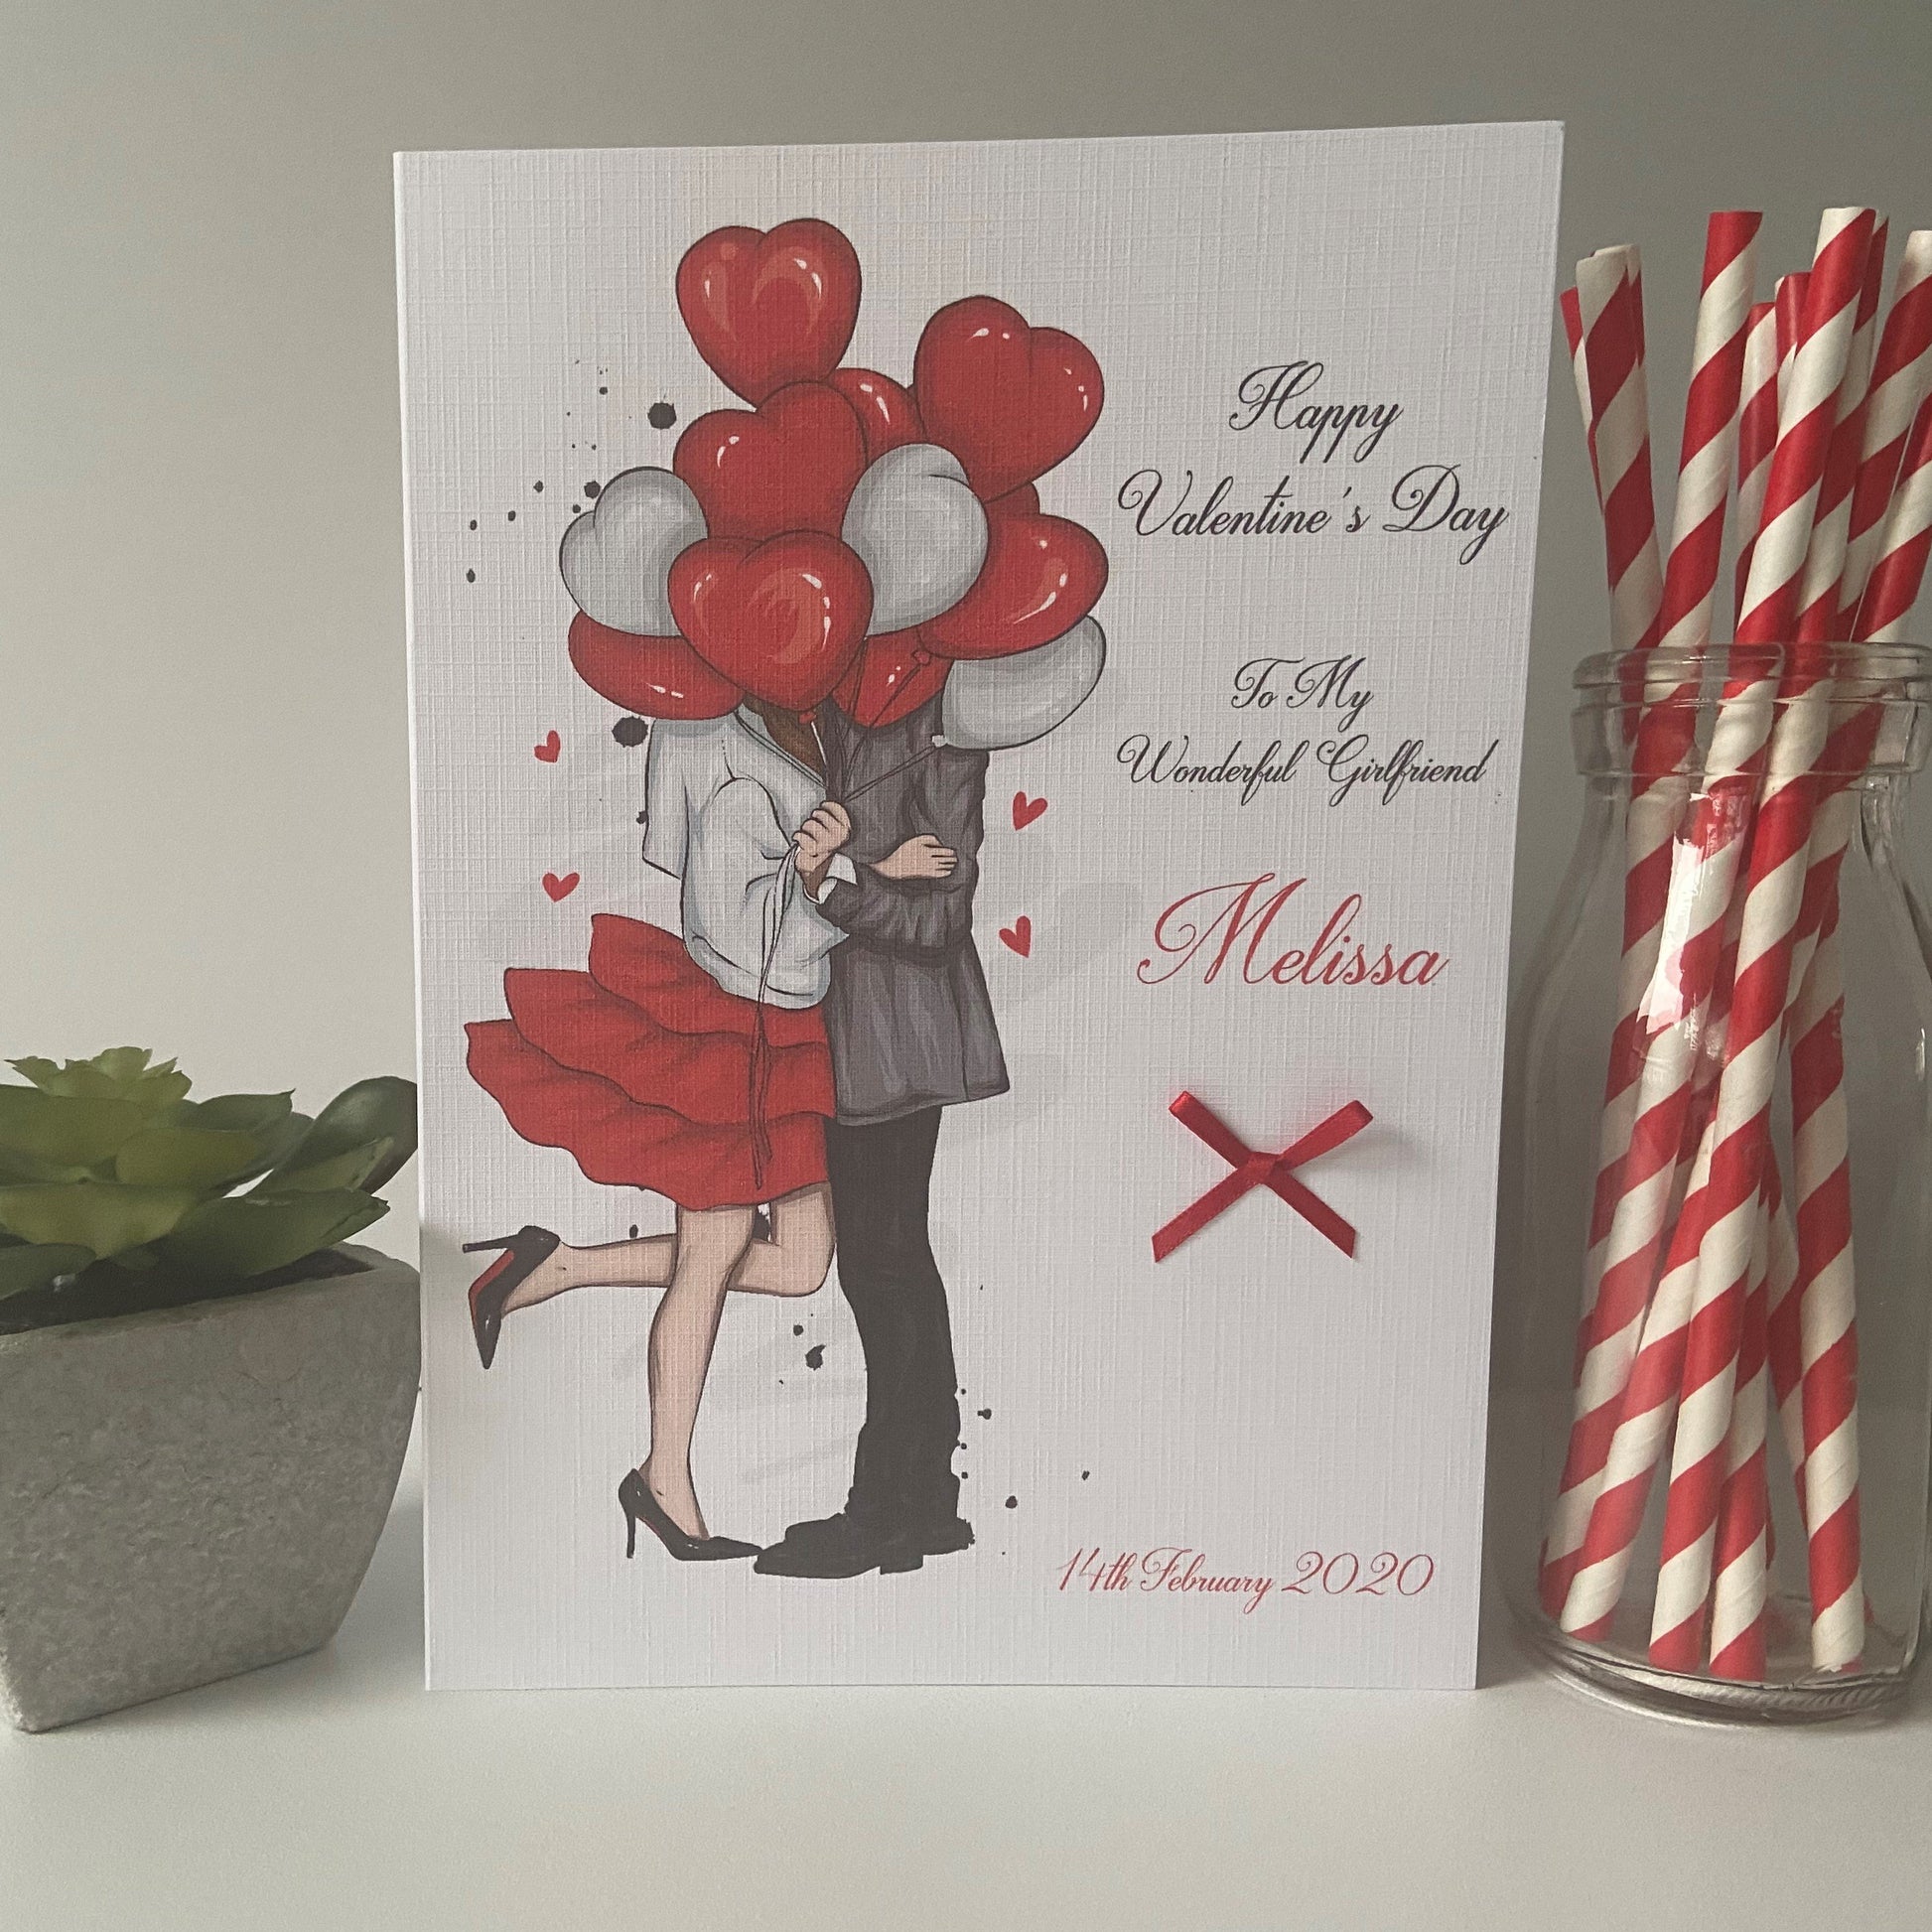 Personalised Handmade Valentine's Day Card Couple Heart Balloons